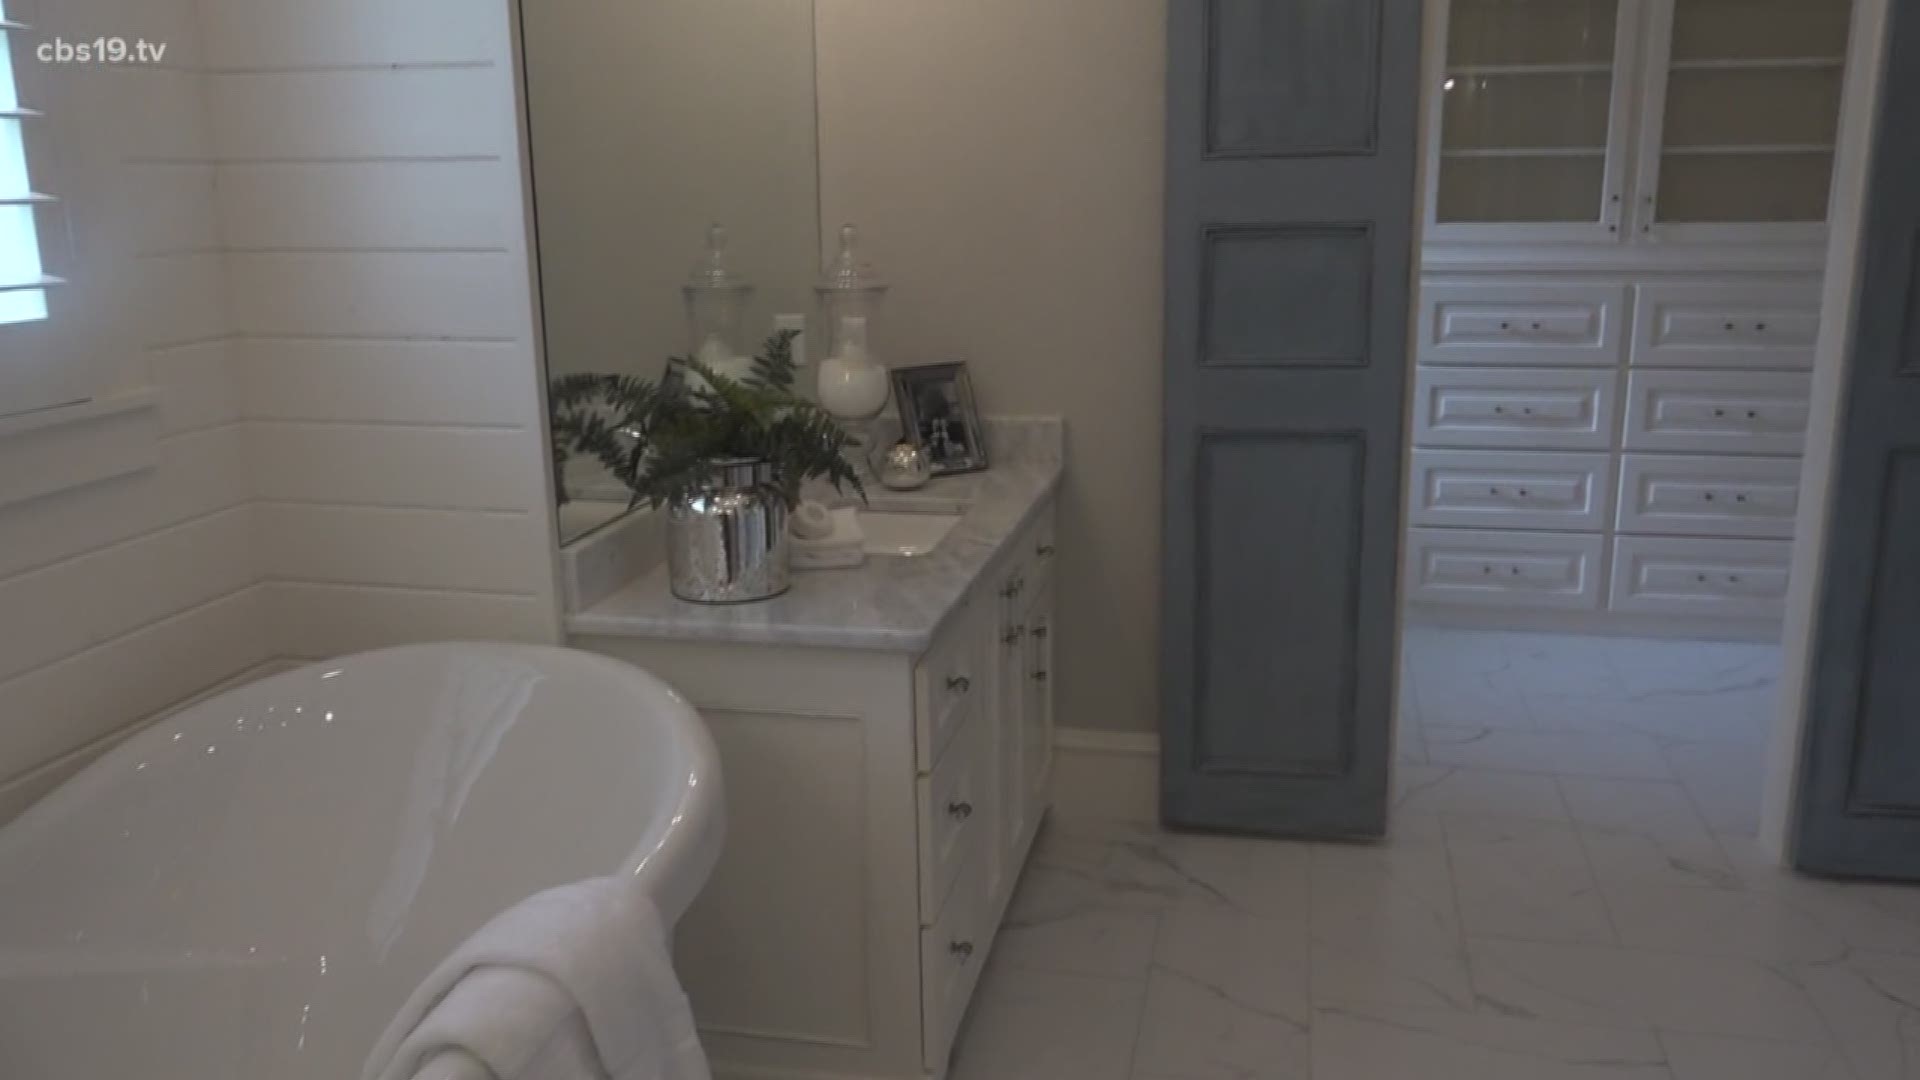 Janey Angelo owner of Angelo Construction Incorporated has one of her customs and remodeled homes featured in the Parade of Homes.